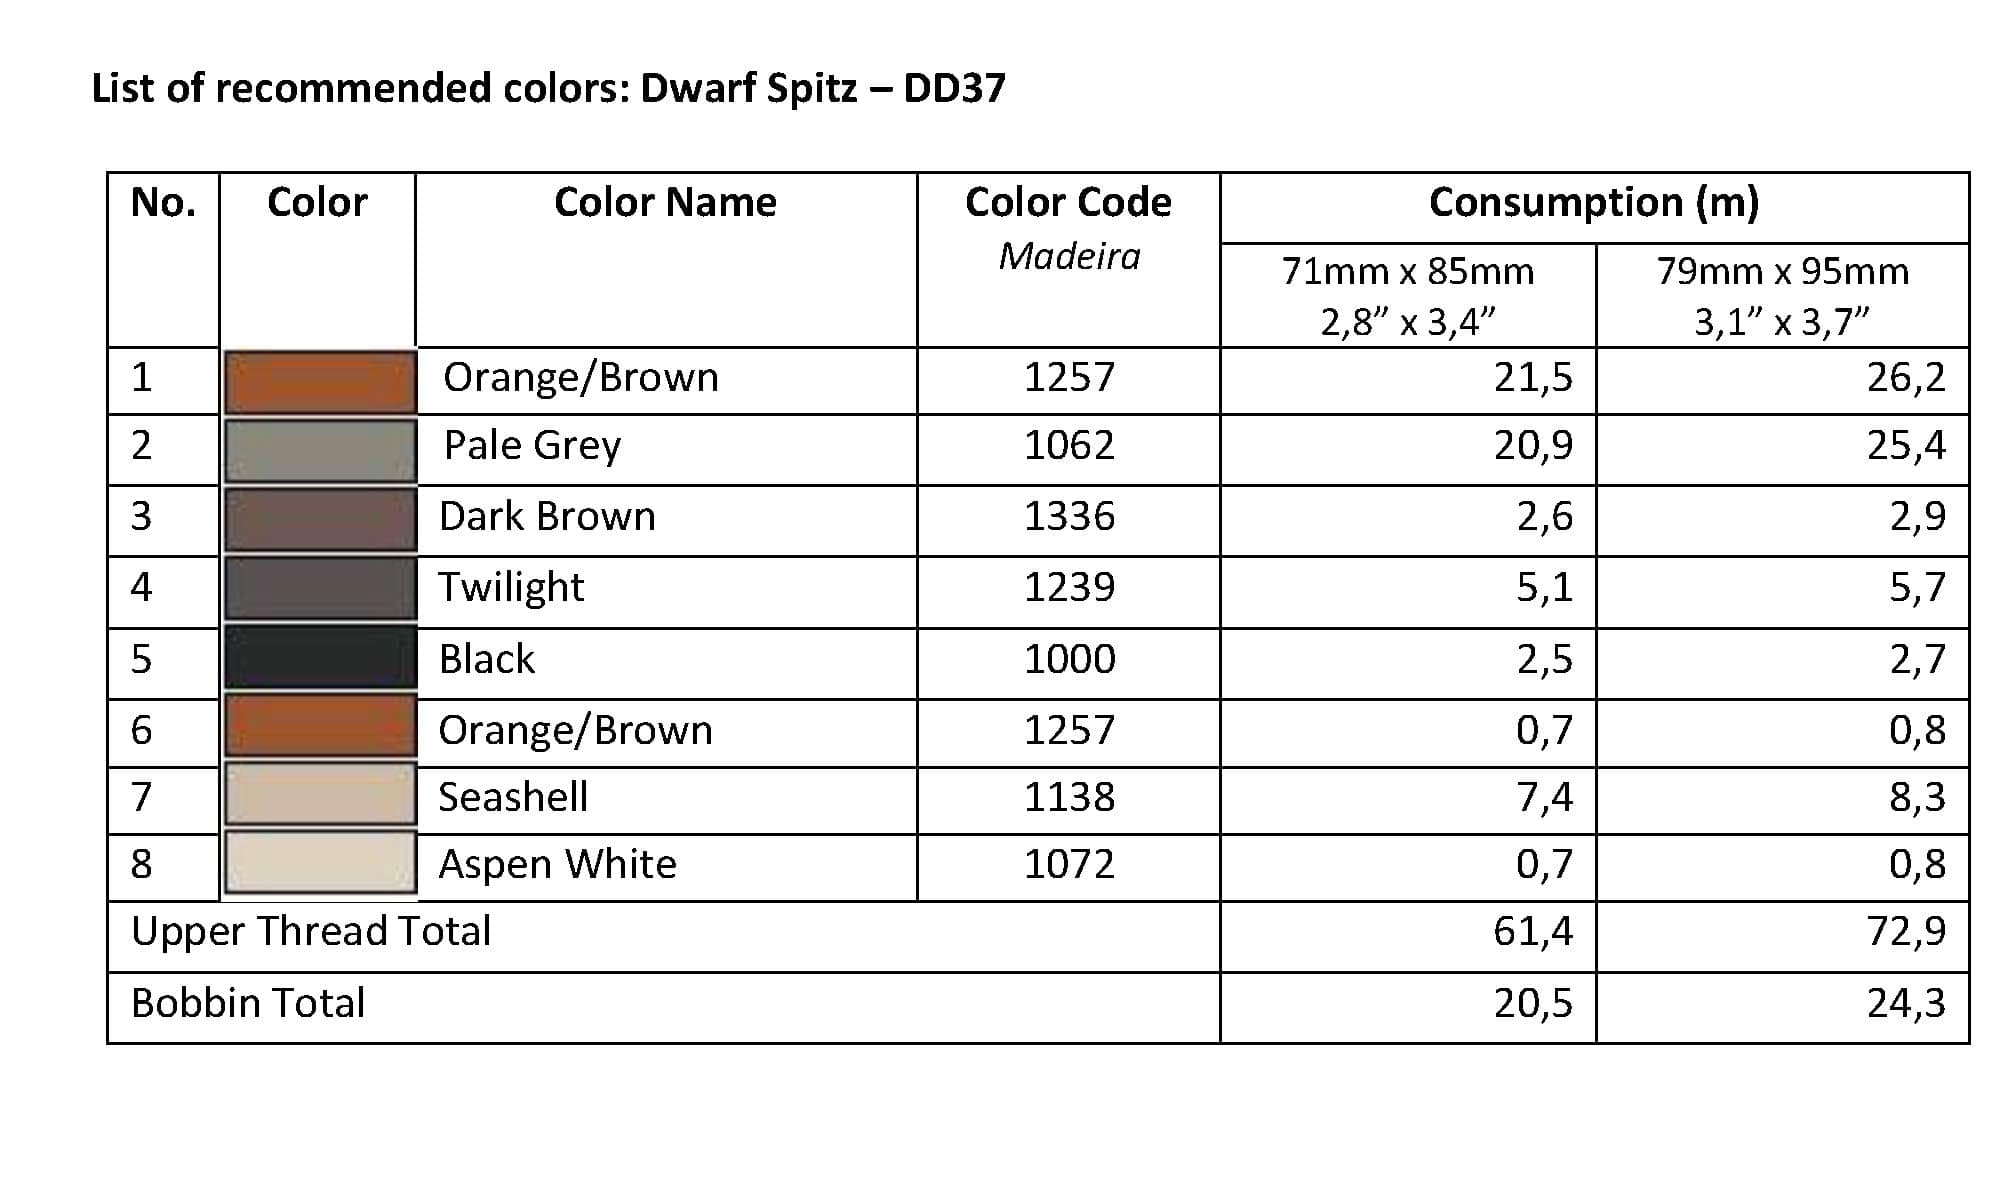 List of Recommended Colors - Dwarf Spitz DD37